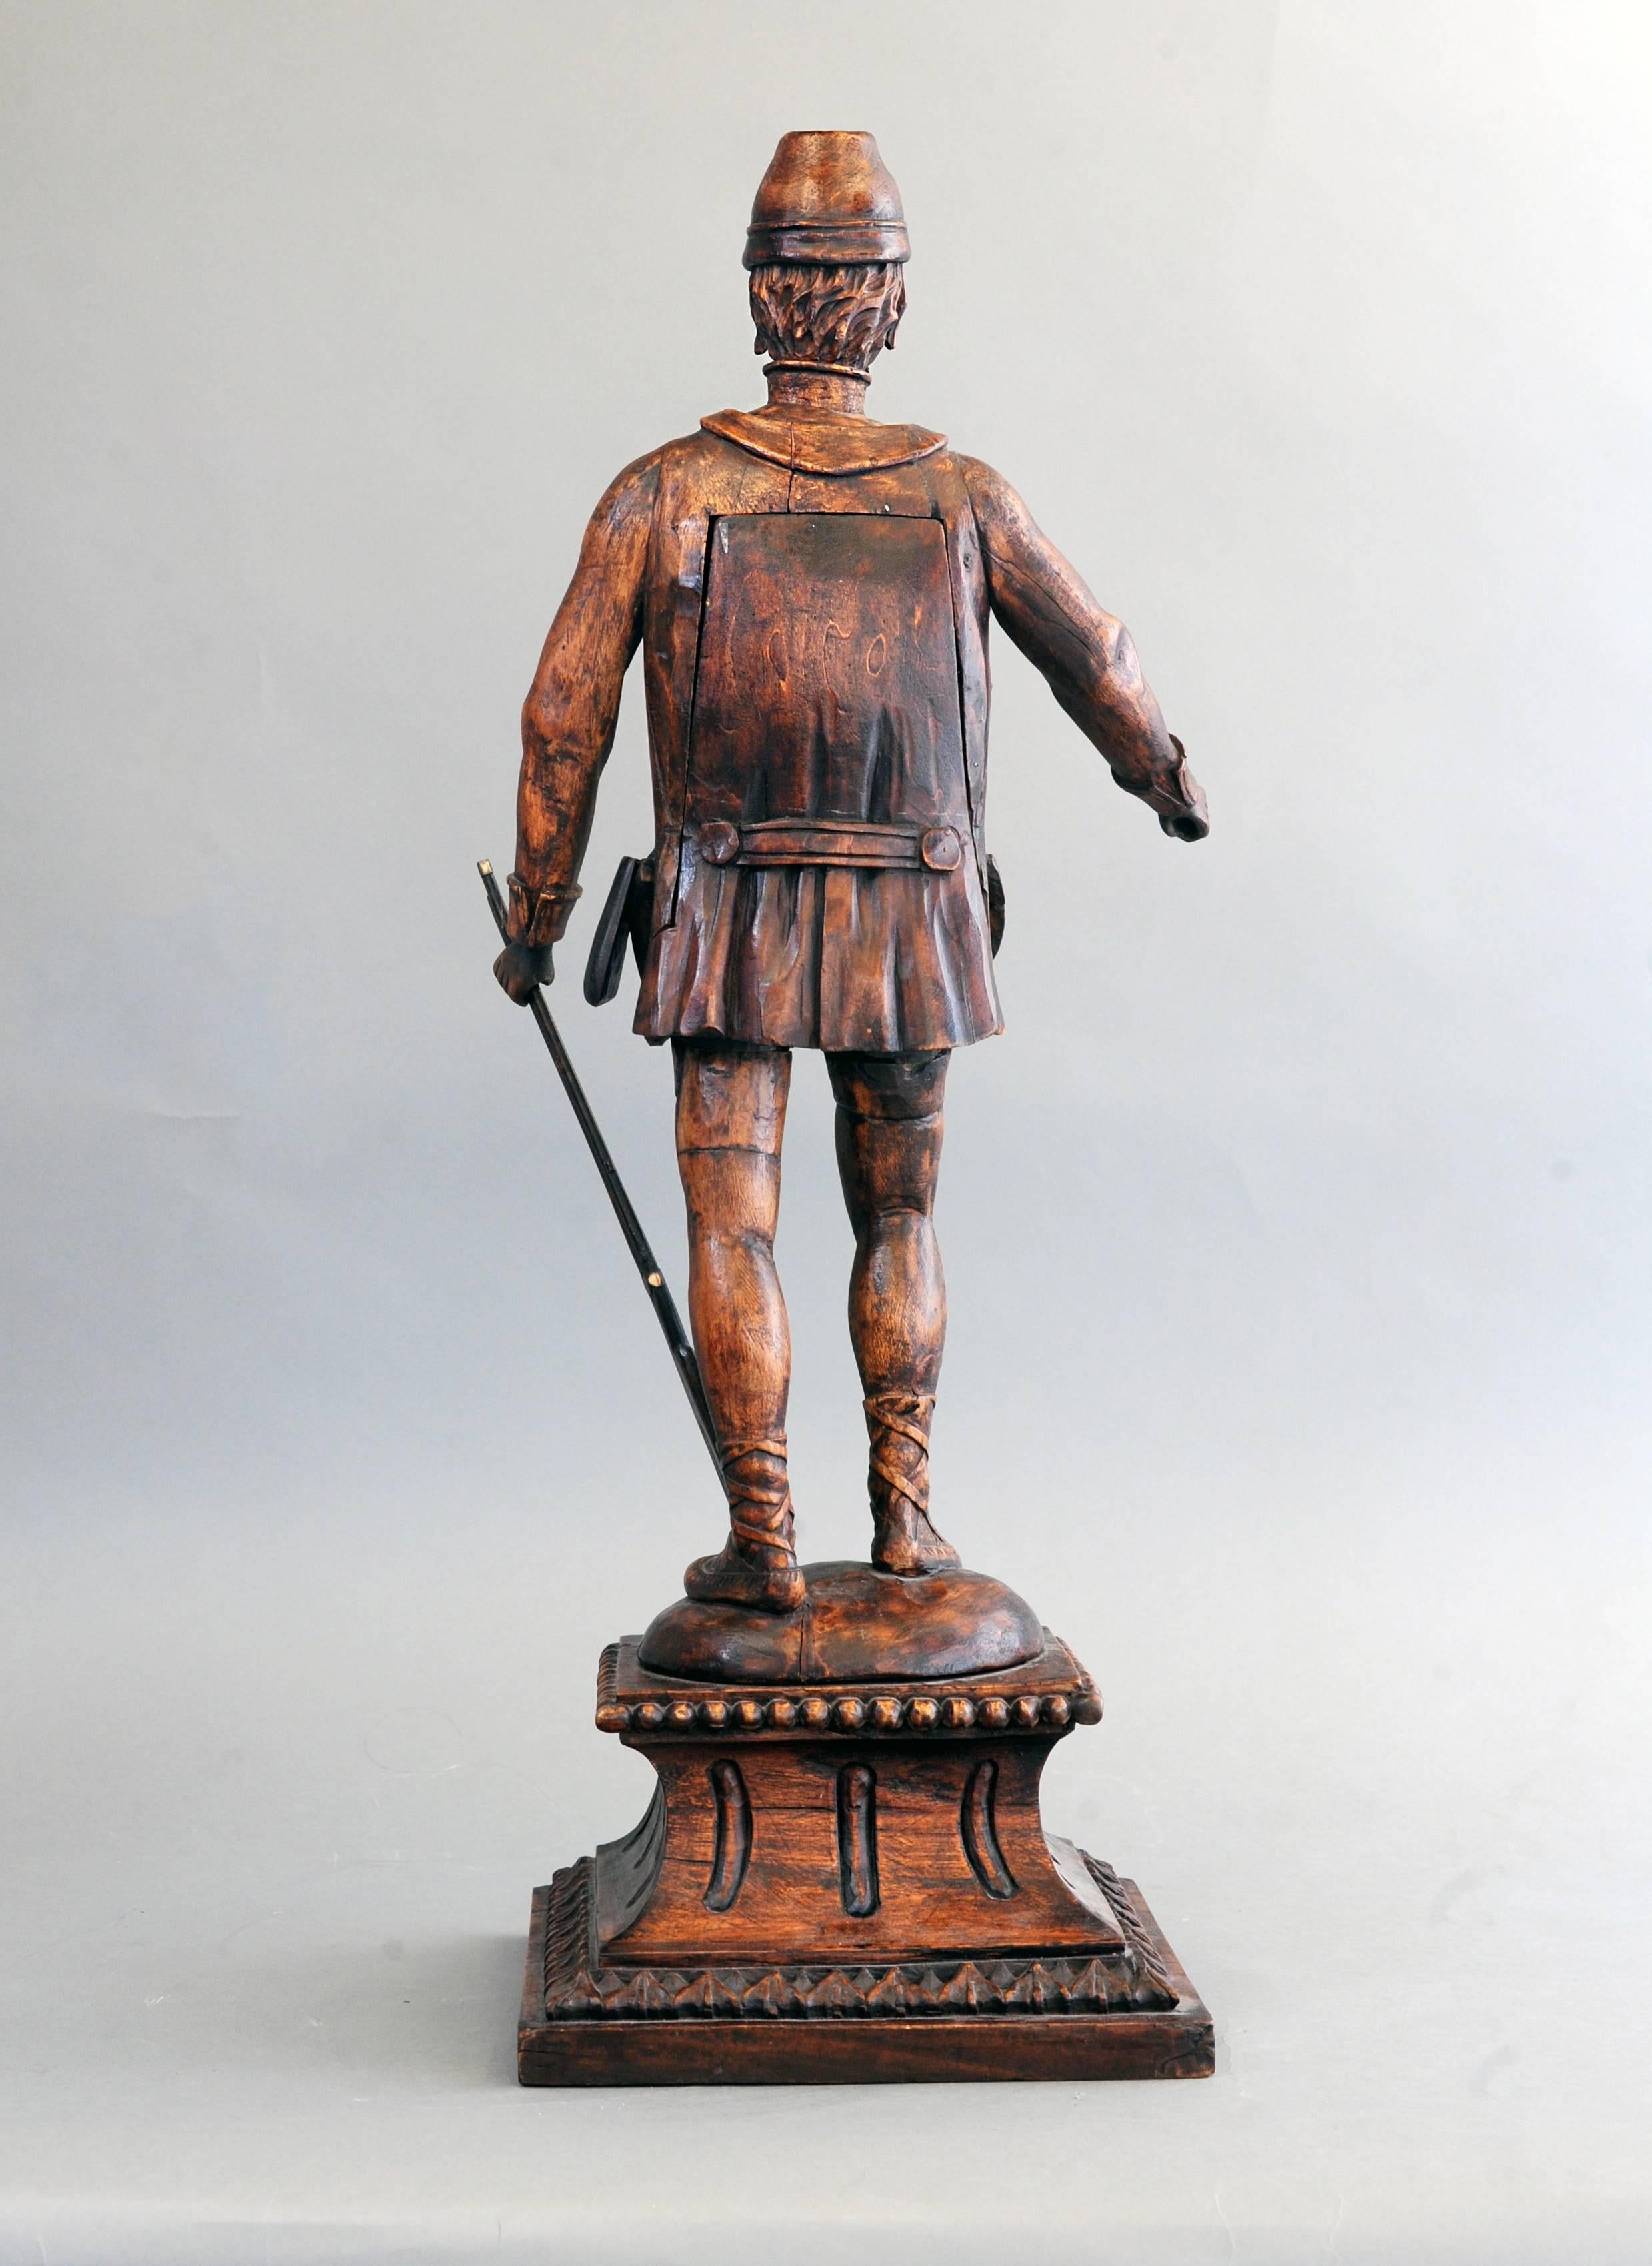 An imposing untouched central Europe soldier figure, circa 1780, signed Jozef Otoo Neutra. The unusual designed figure with hexagonal movement has quarter striking on bells and silk thread suspension. The soldier is fully equipped, lovely carved and